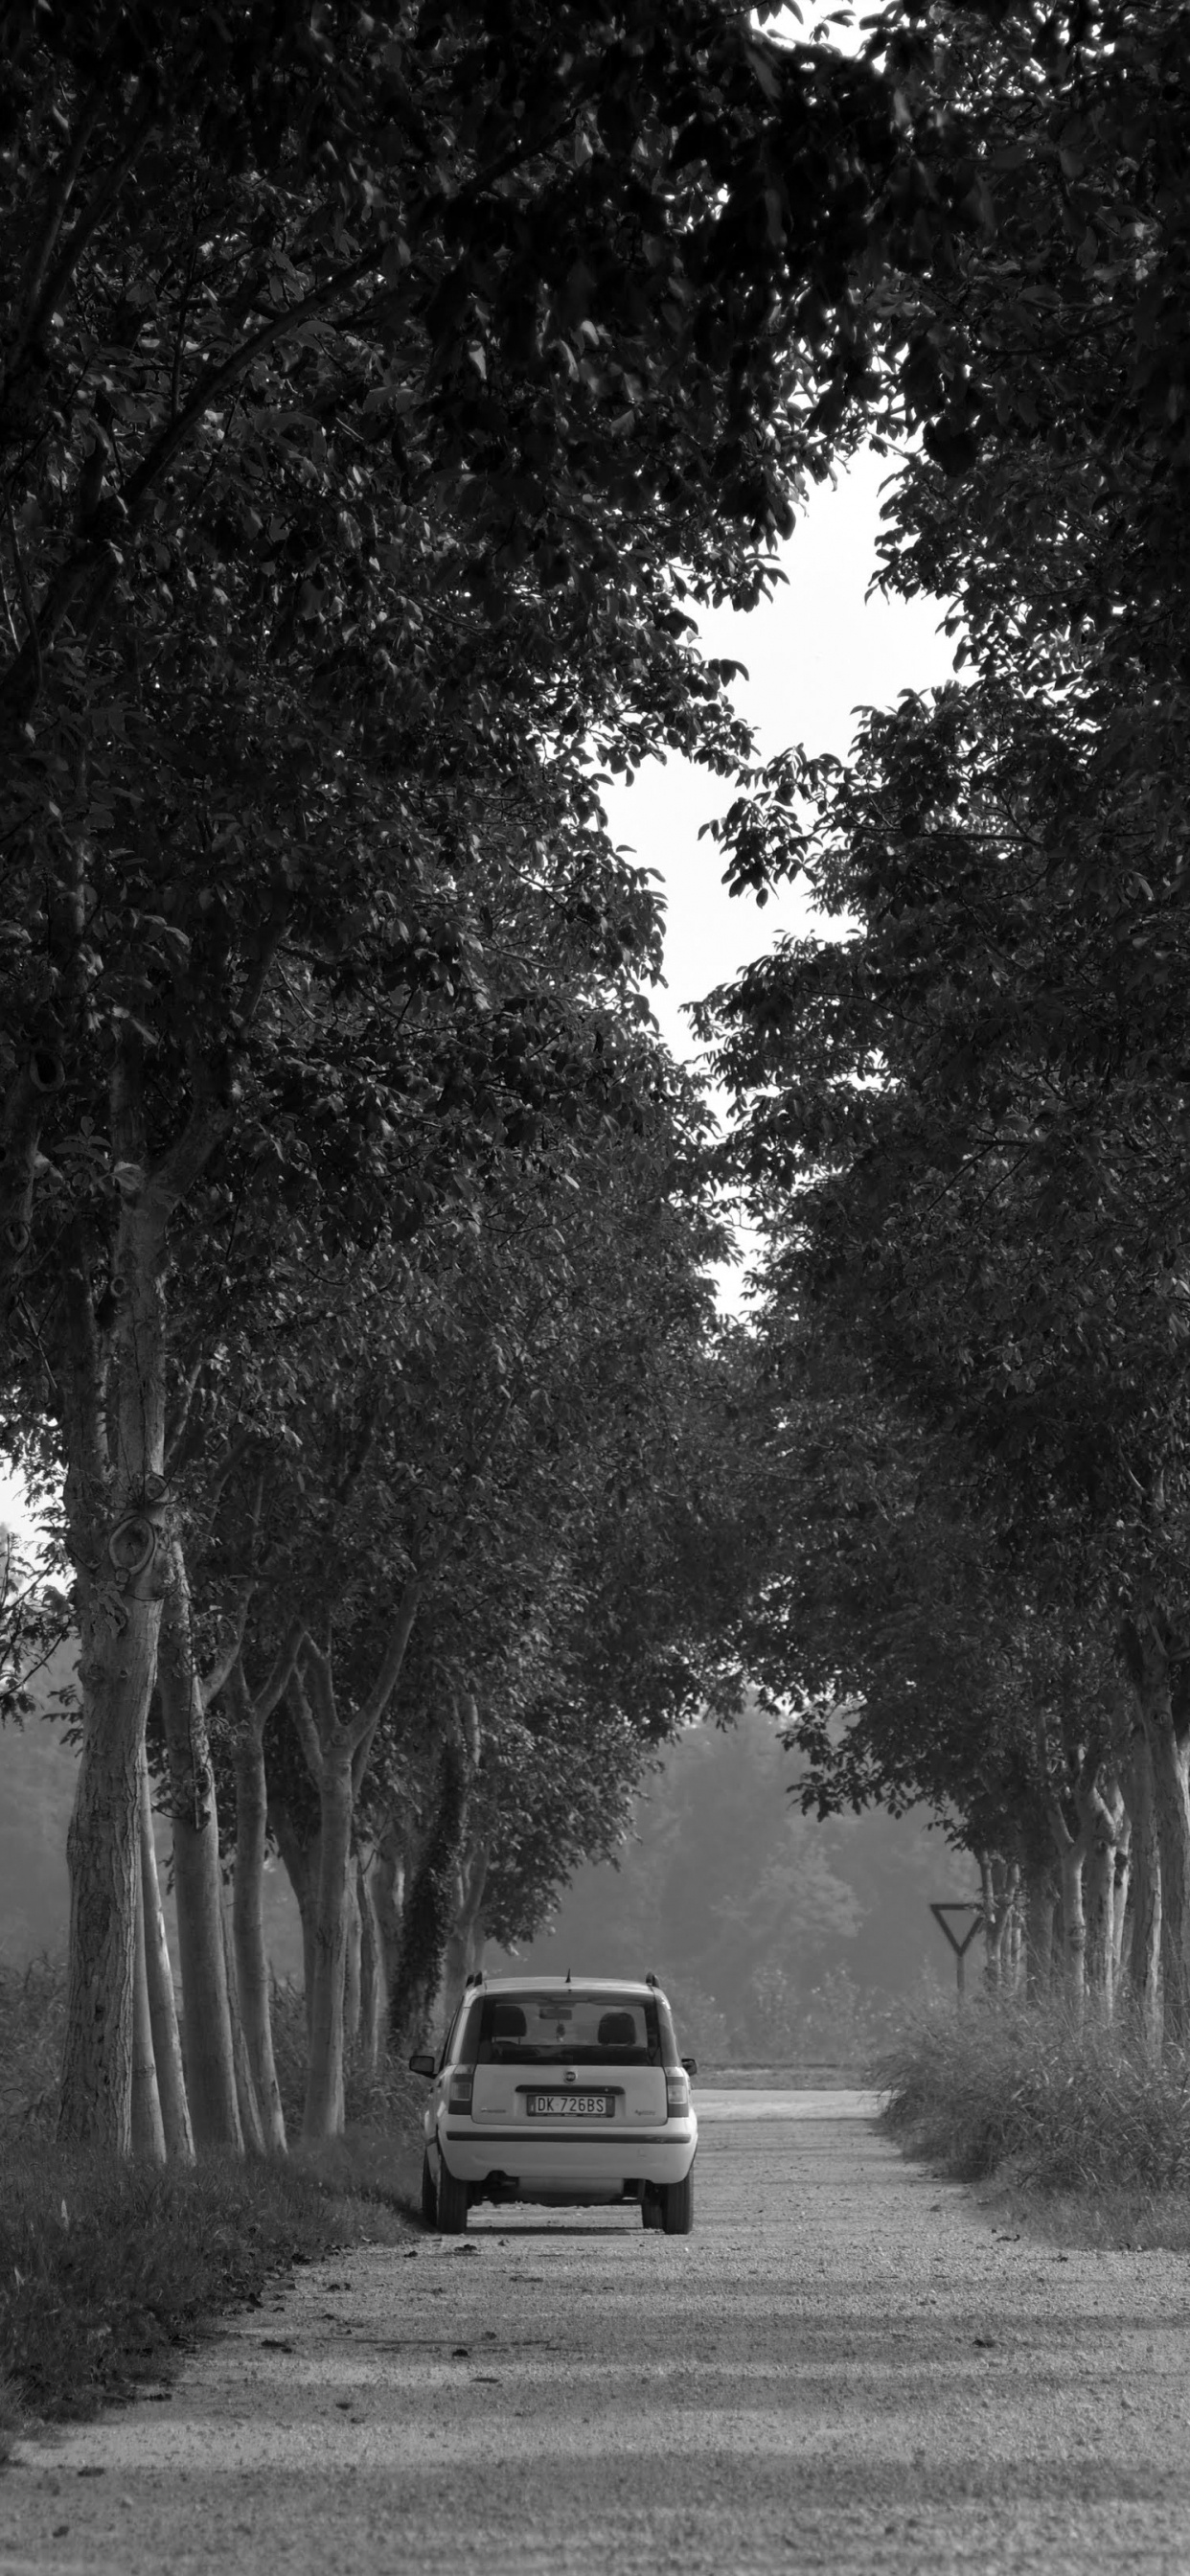 Grayscale Photo of Car on Road Between Trees. Wallpaper in 1242x2688 Resolution